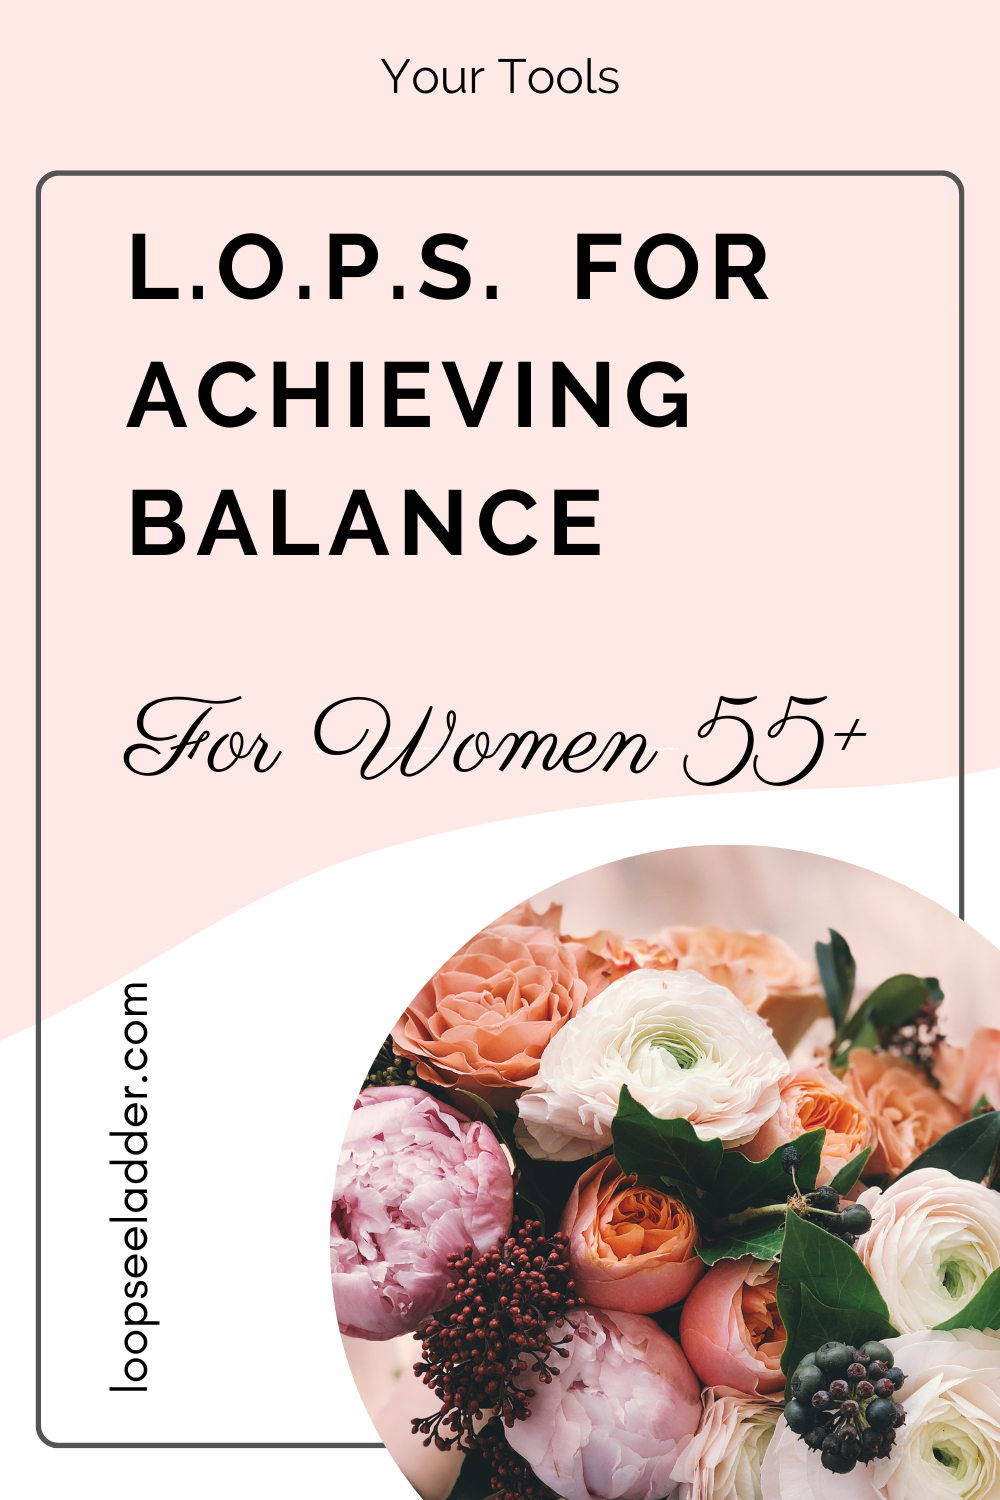 L.O.P.S. - A Framework for Women 55+ to Achieve Balance in their Life